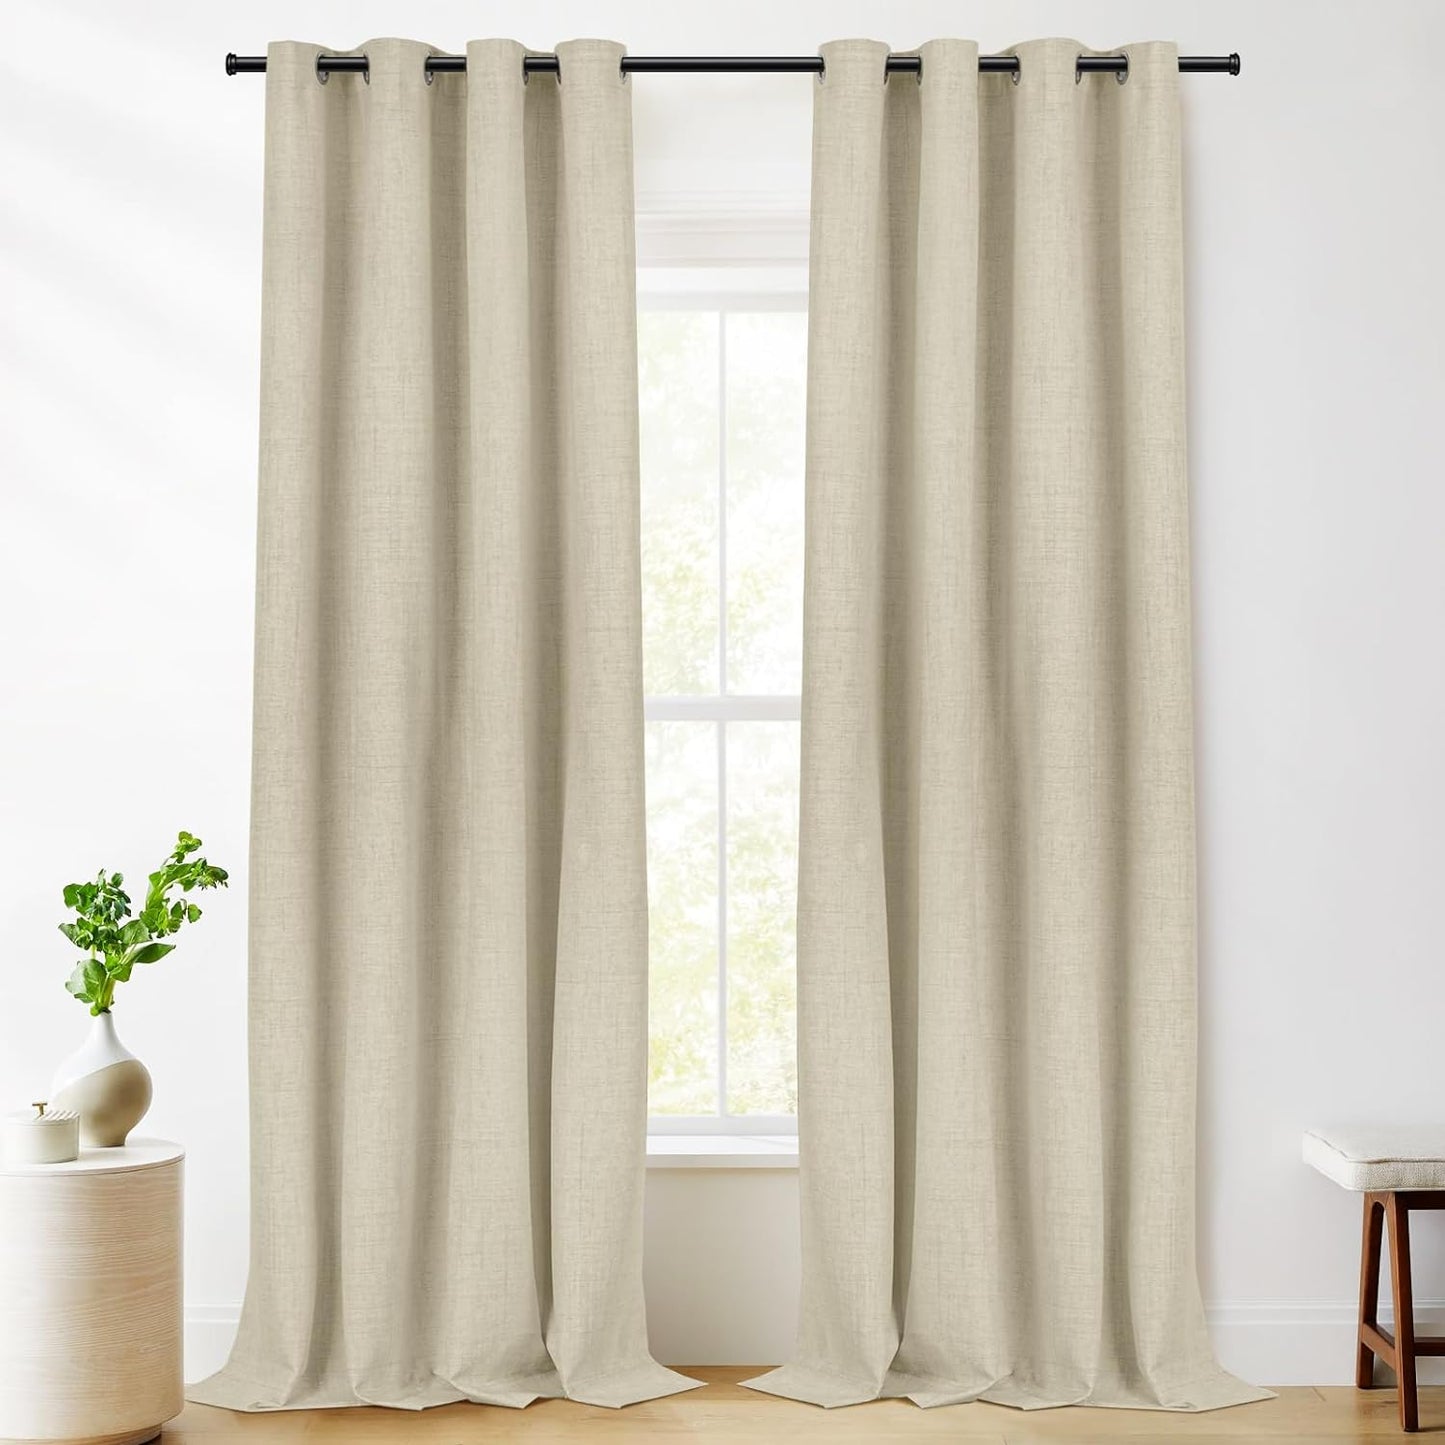 RHF Blackout Curtains 84 Inch Length 2 Panels Set, Primitive Linen Look, 100% Blackout Curtains Linen Black Out Curtains for Bedroom Windows, Burlap Grommet Curtains-(50X84, Oatmeal)  Rose Home Fashion Natural Flax W50 X L108 